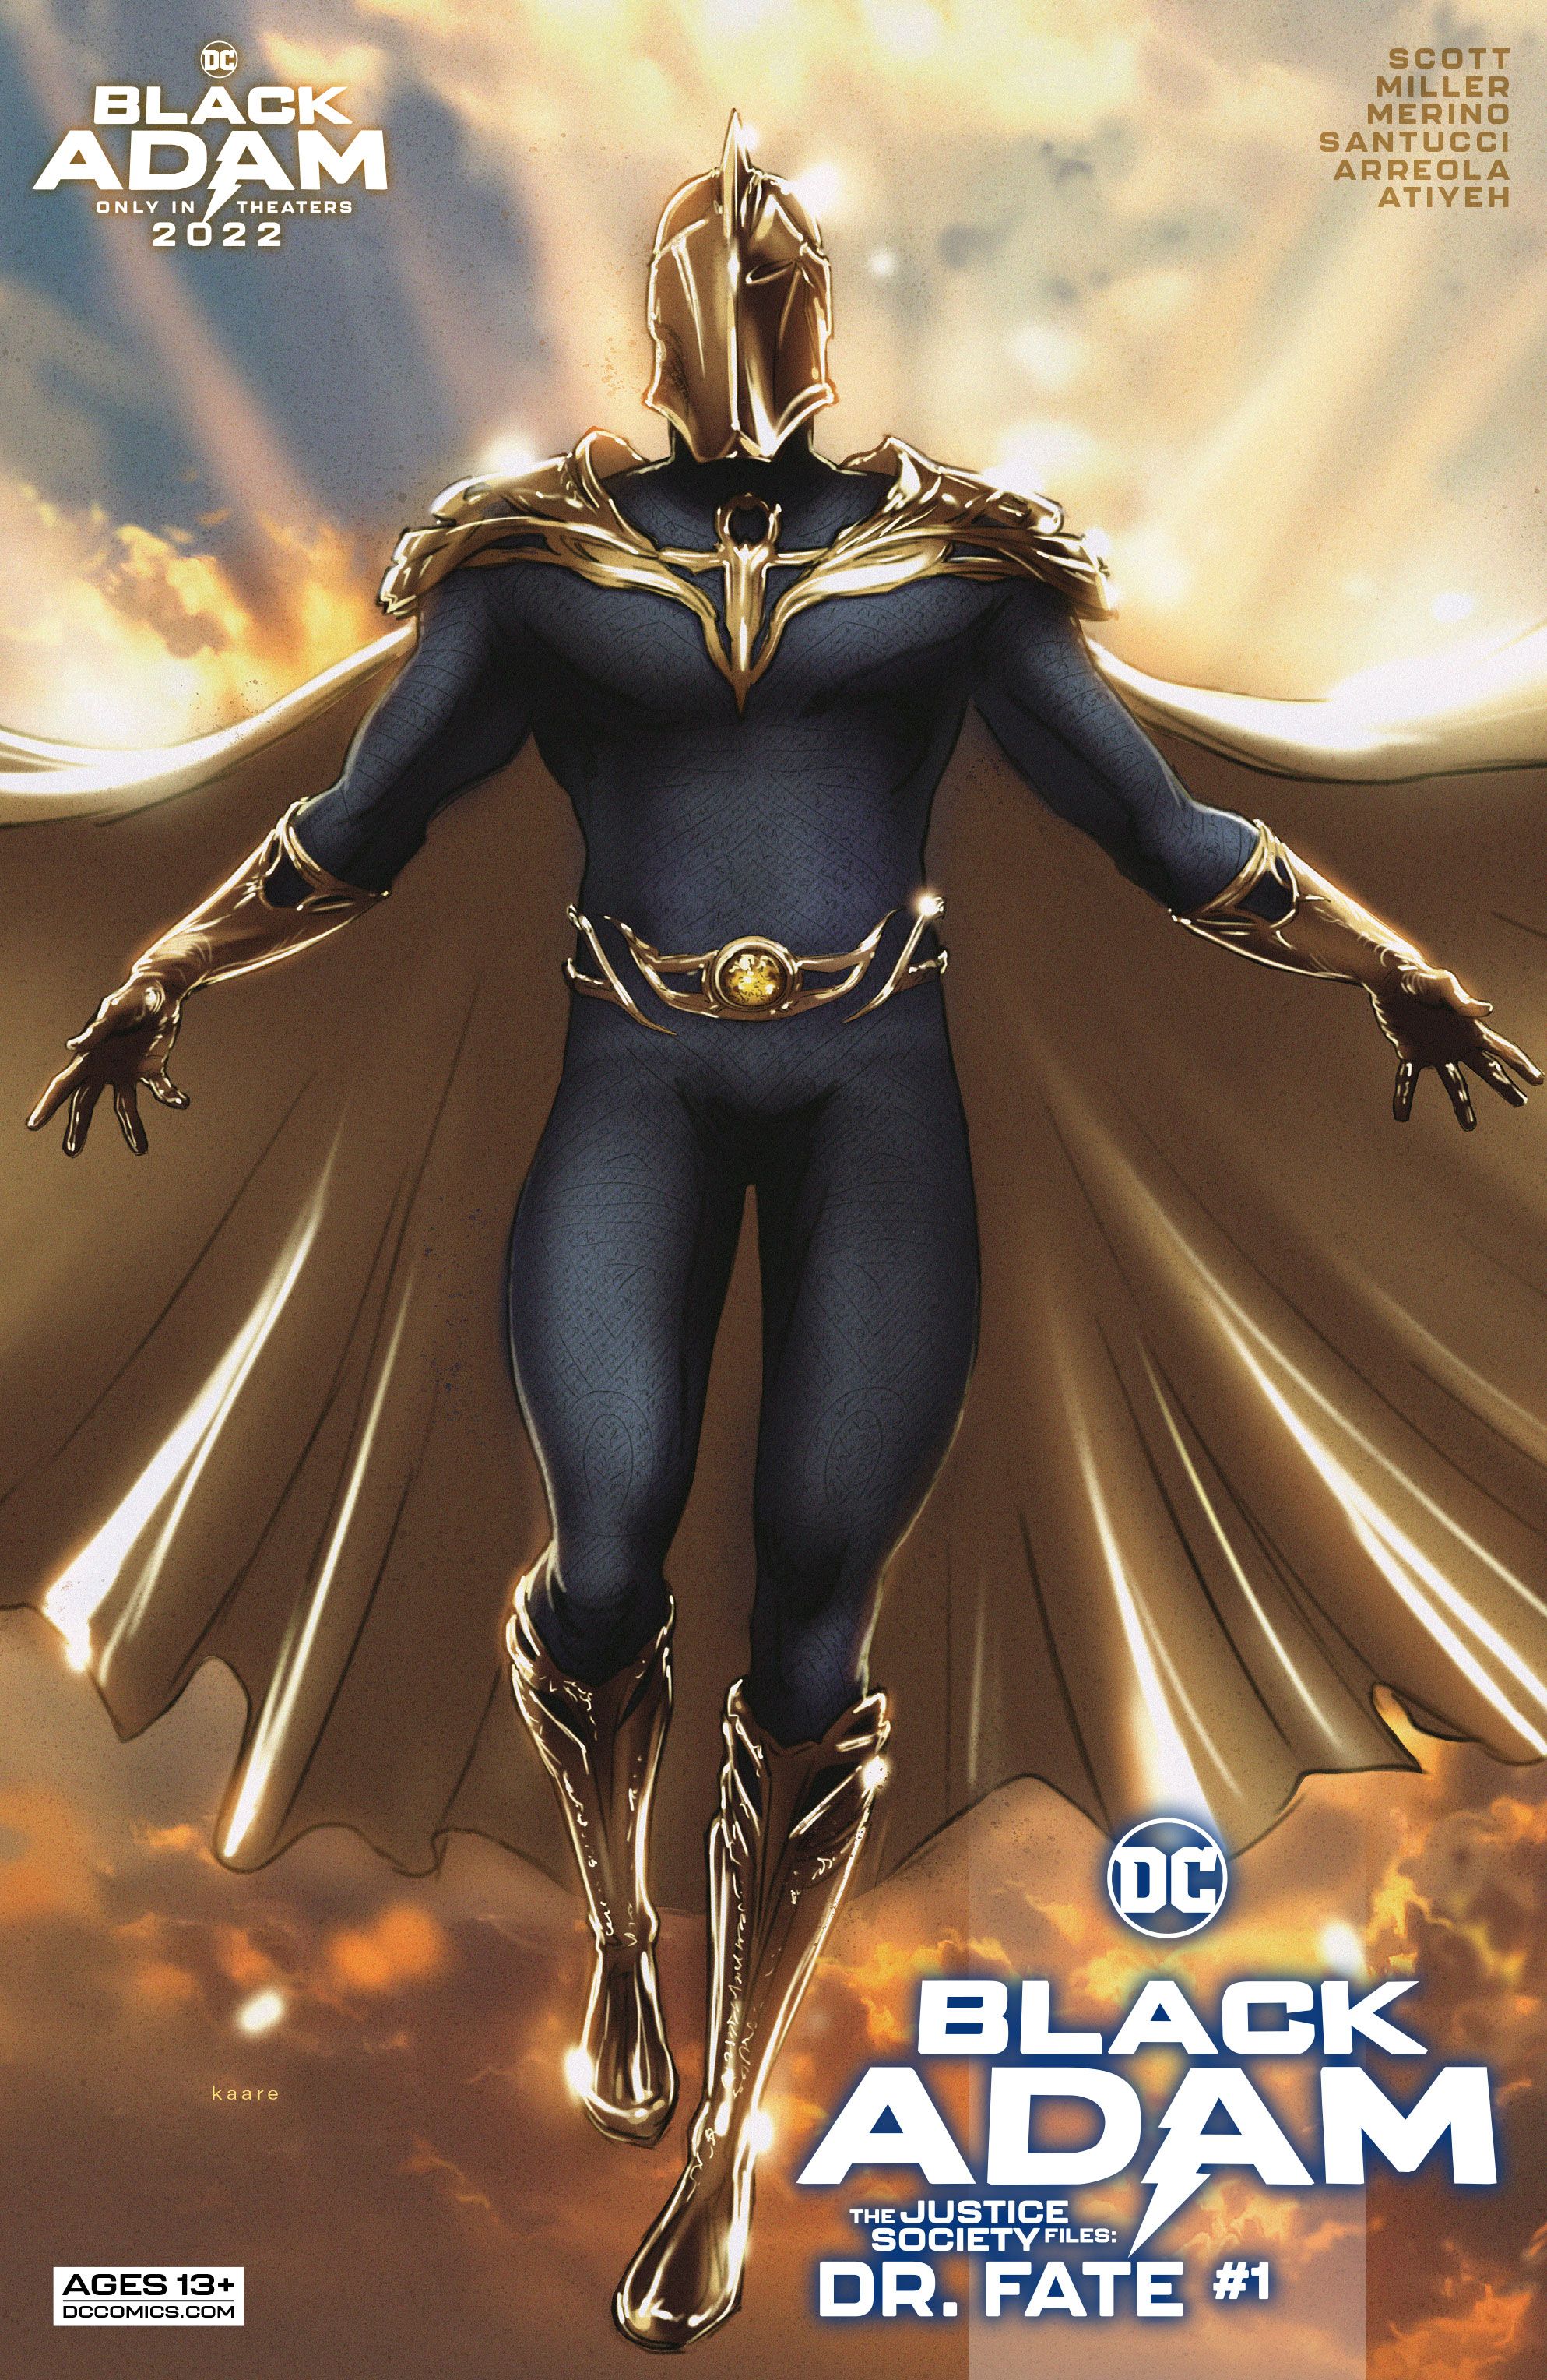 Black-Adam-The-Justice-Society-Files-Dr-Fate-1-1